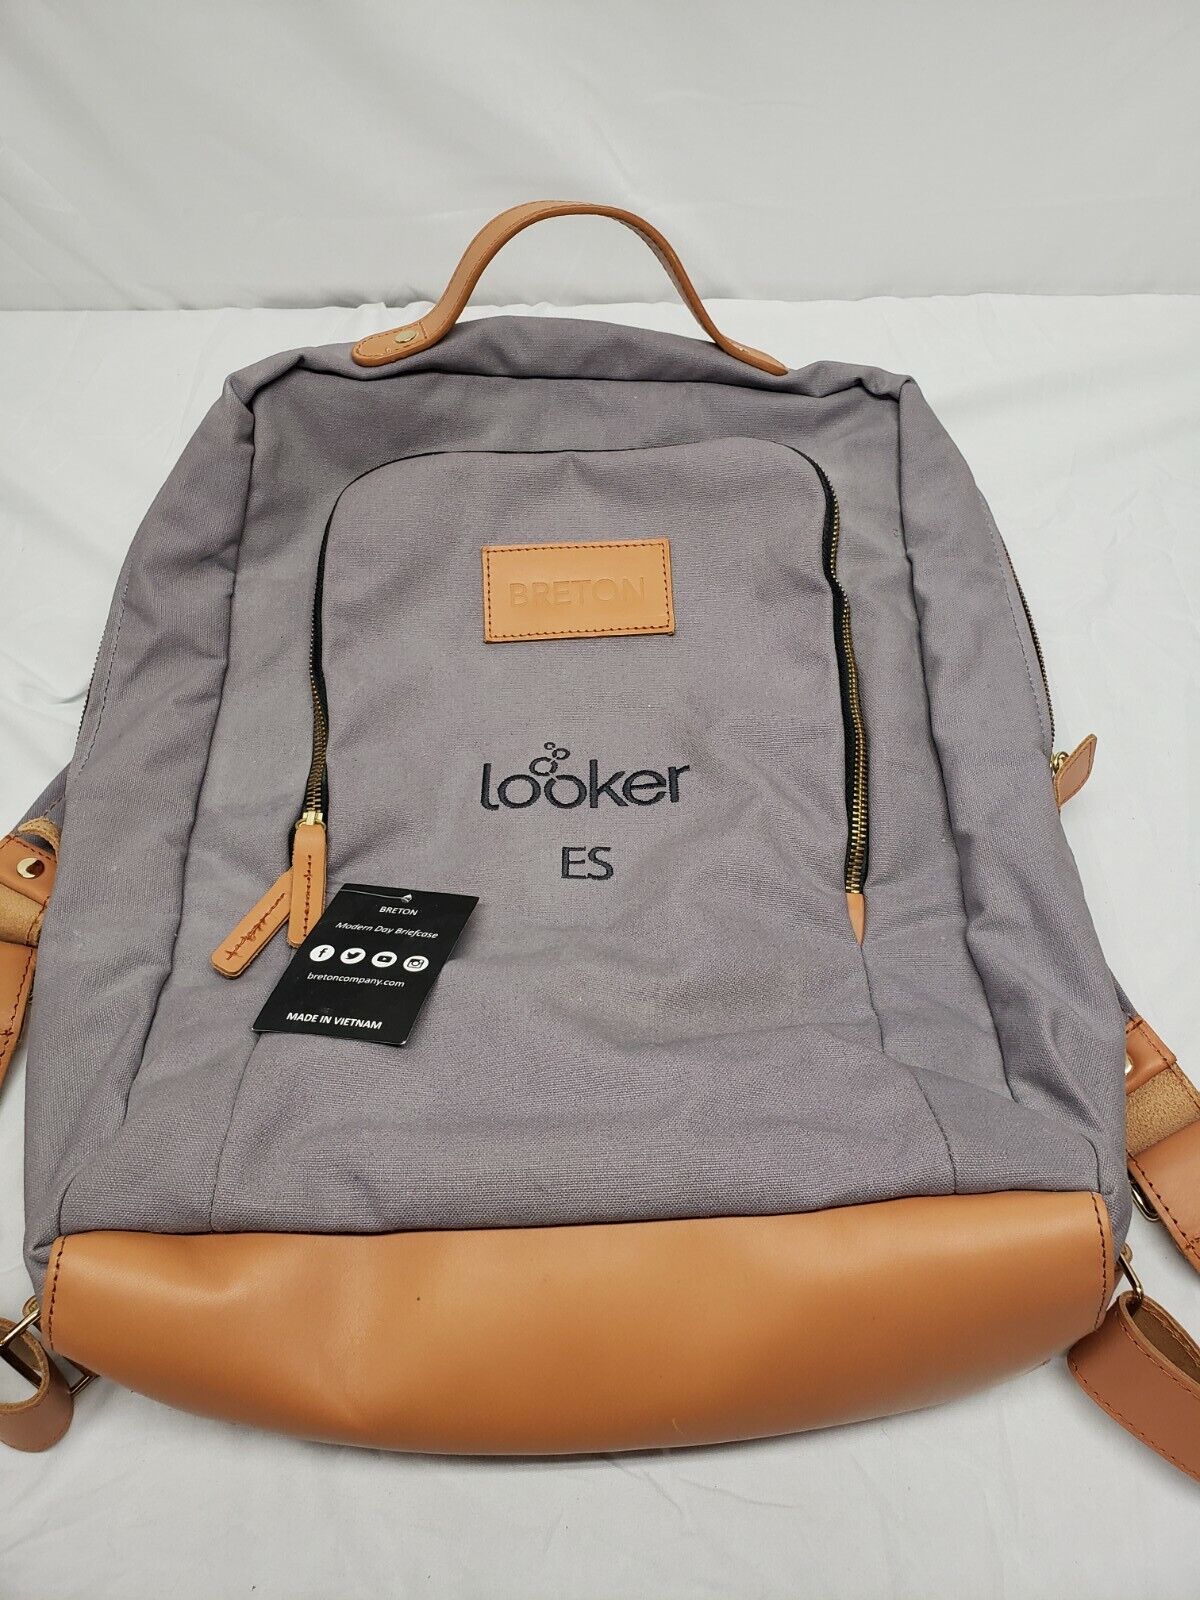 RARE Breton Modern Day Briefcase Backpack LOOKER canvas leather SOLD OUT ONLINE